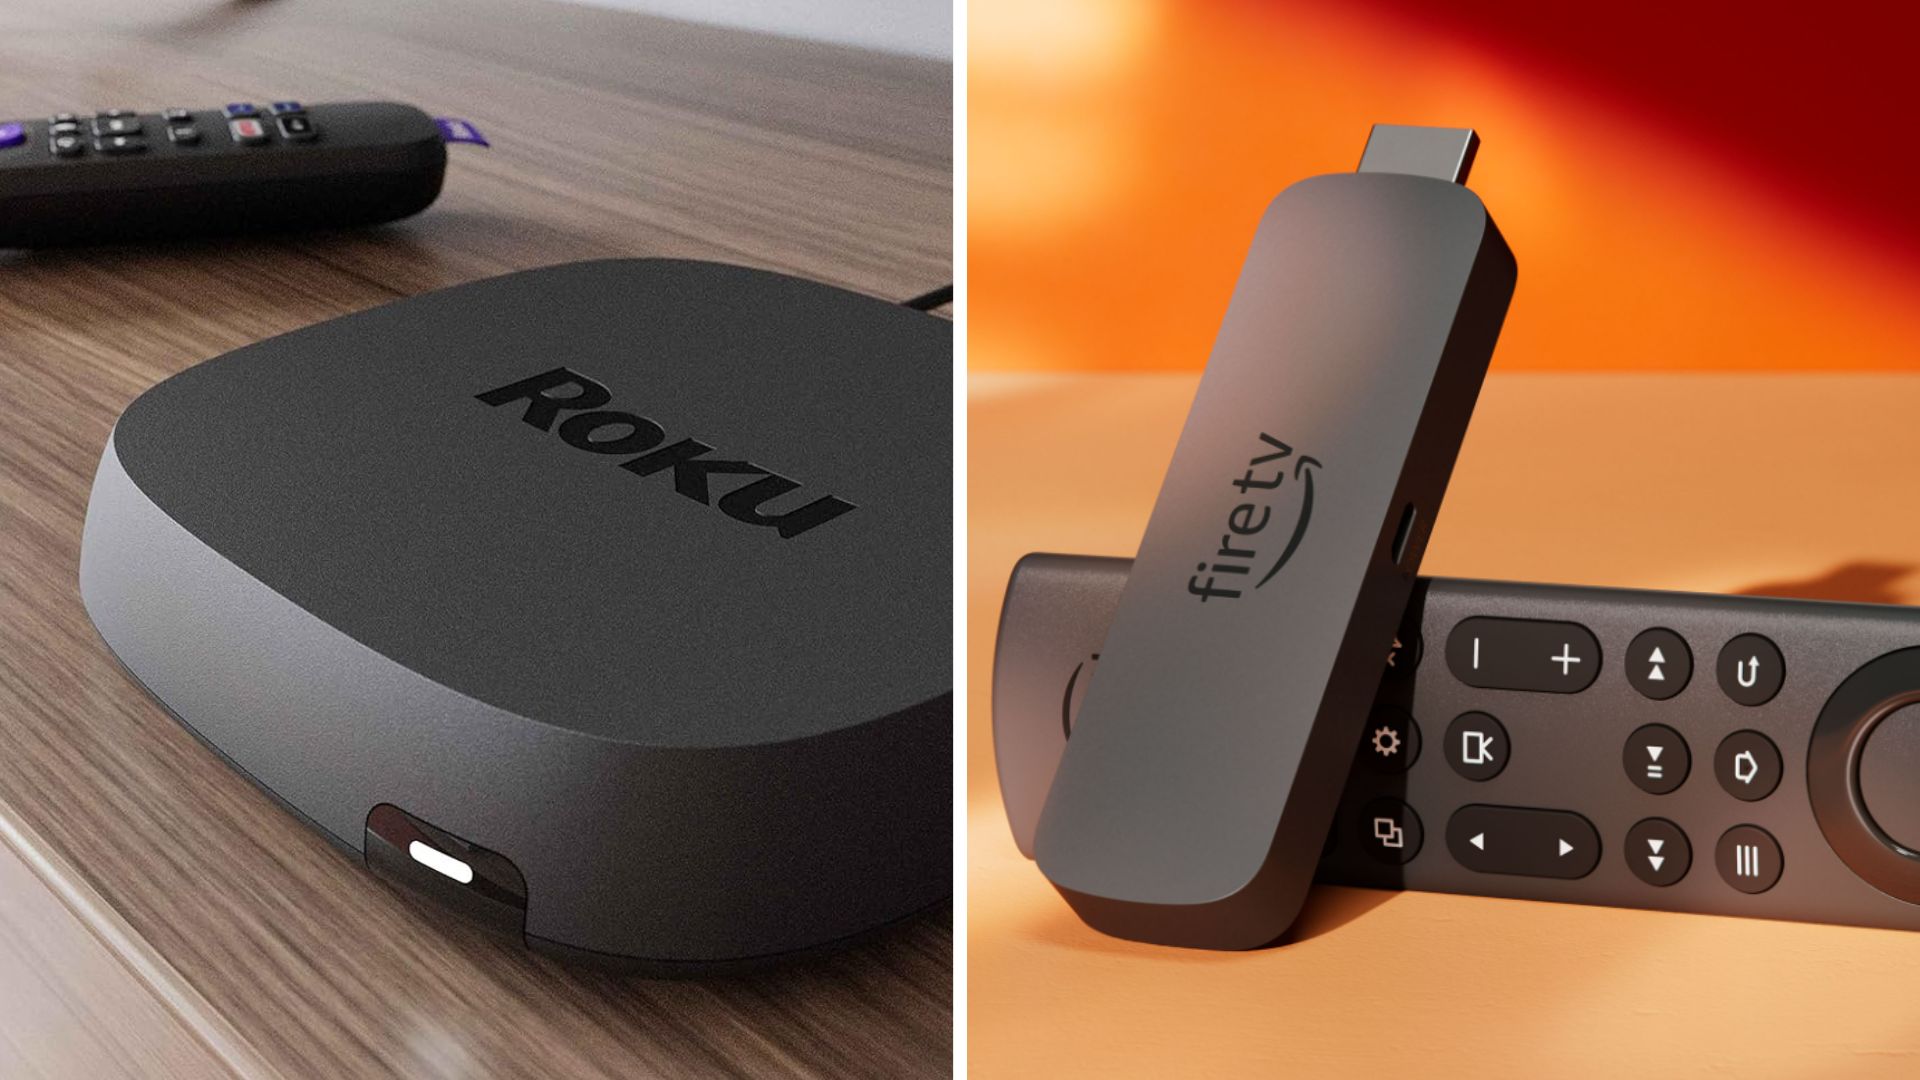 Roku Express, Powerful HD streaming. Low cost.